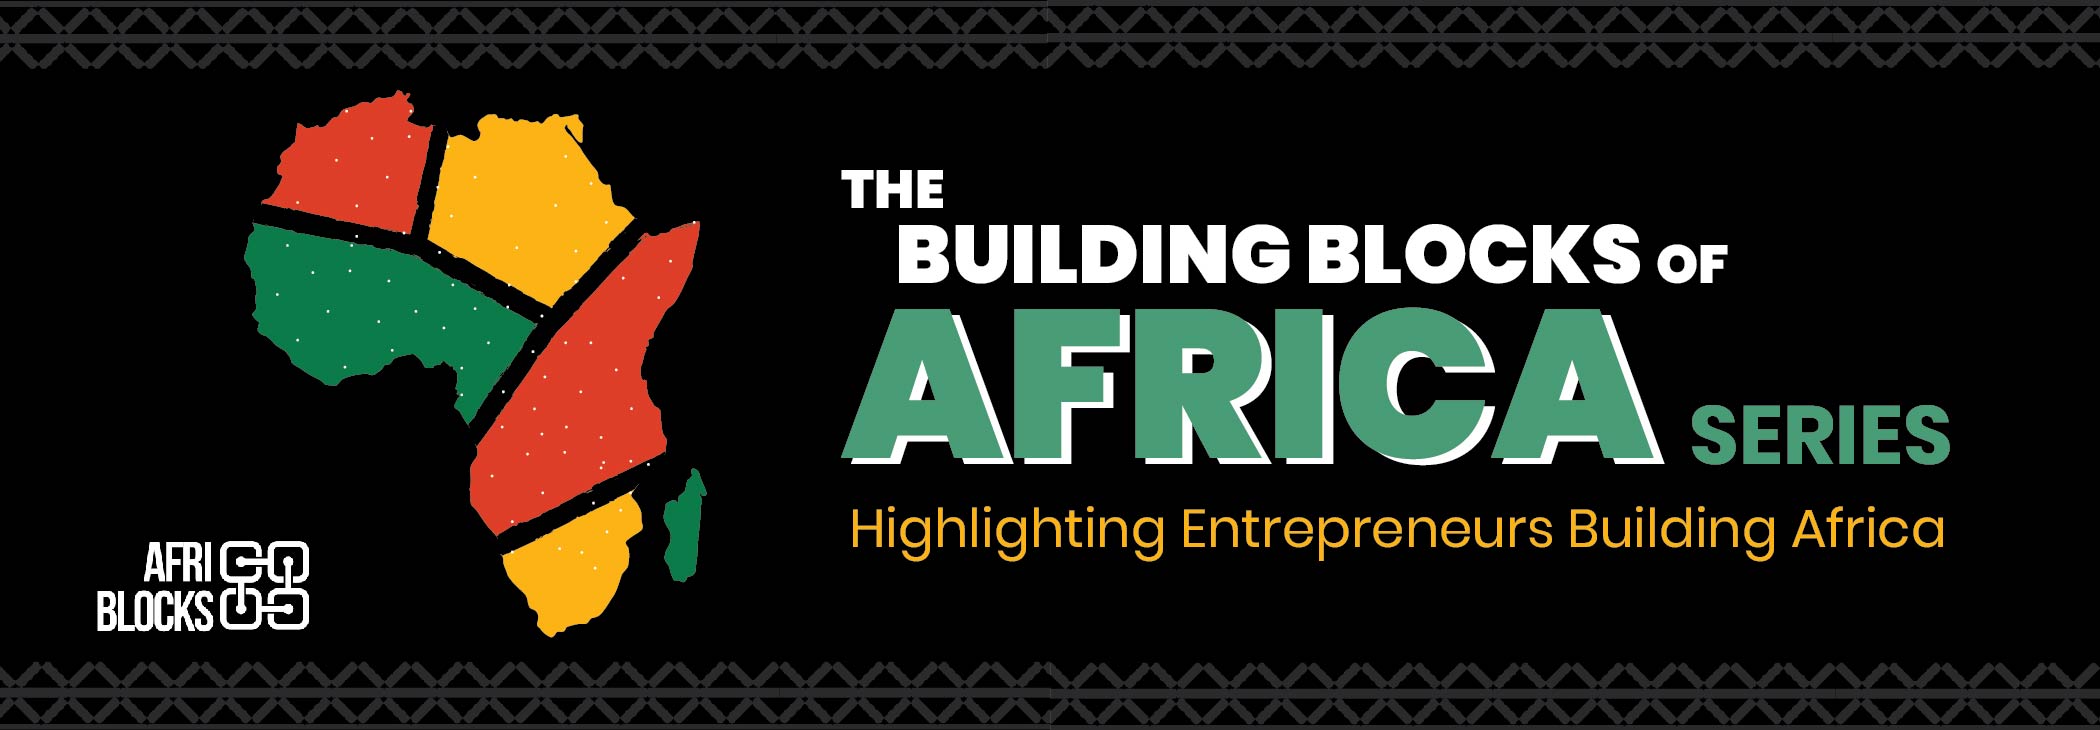 The Building Blocks Of Africa Series: Introduction